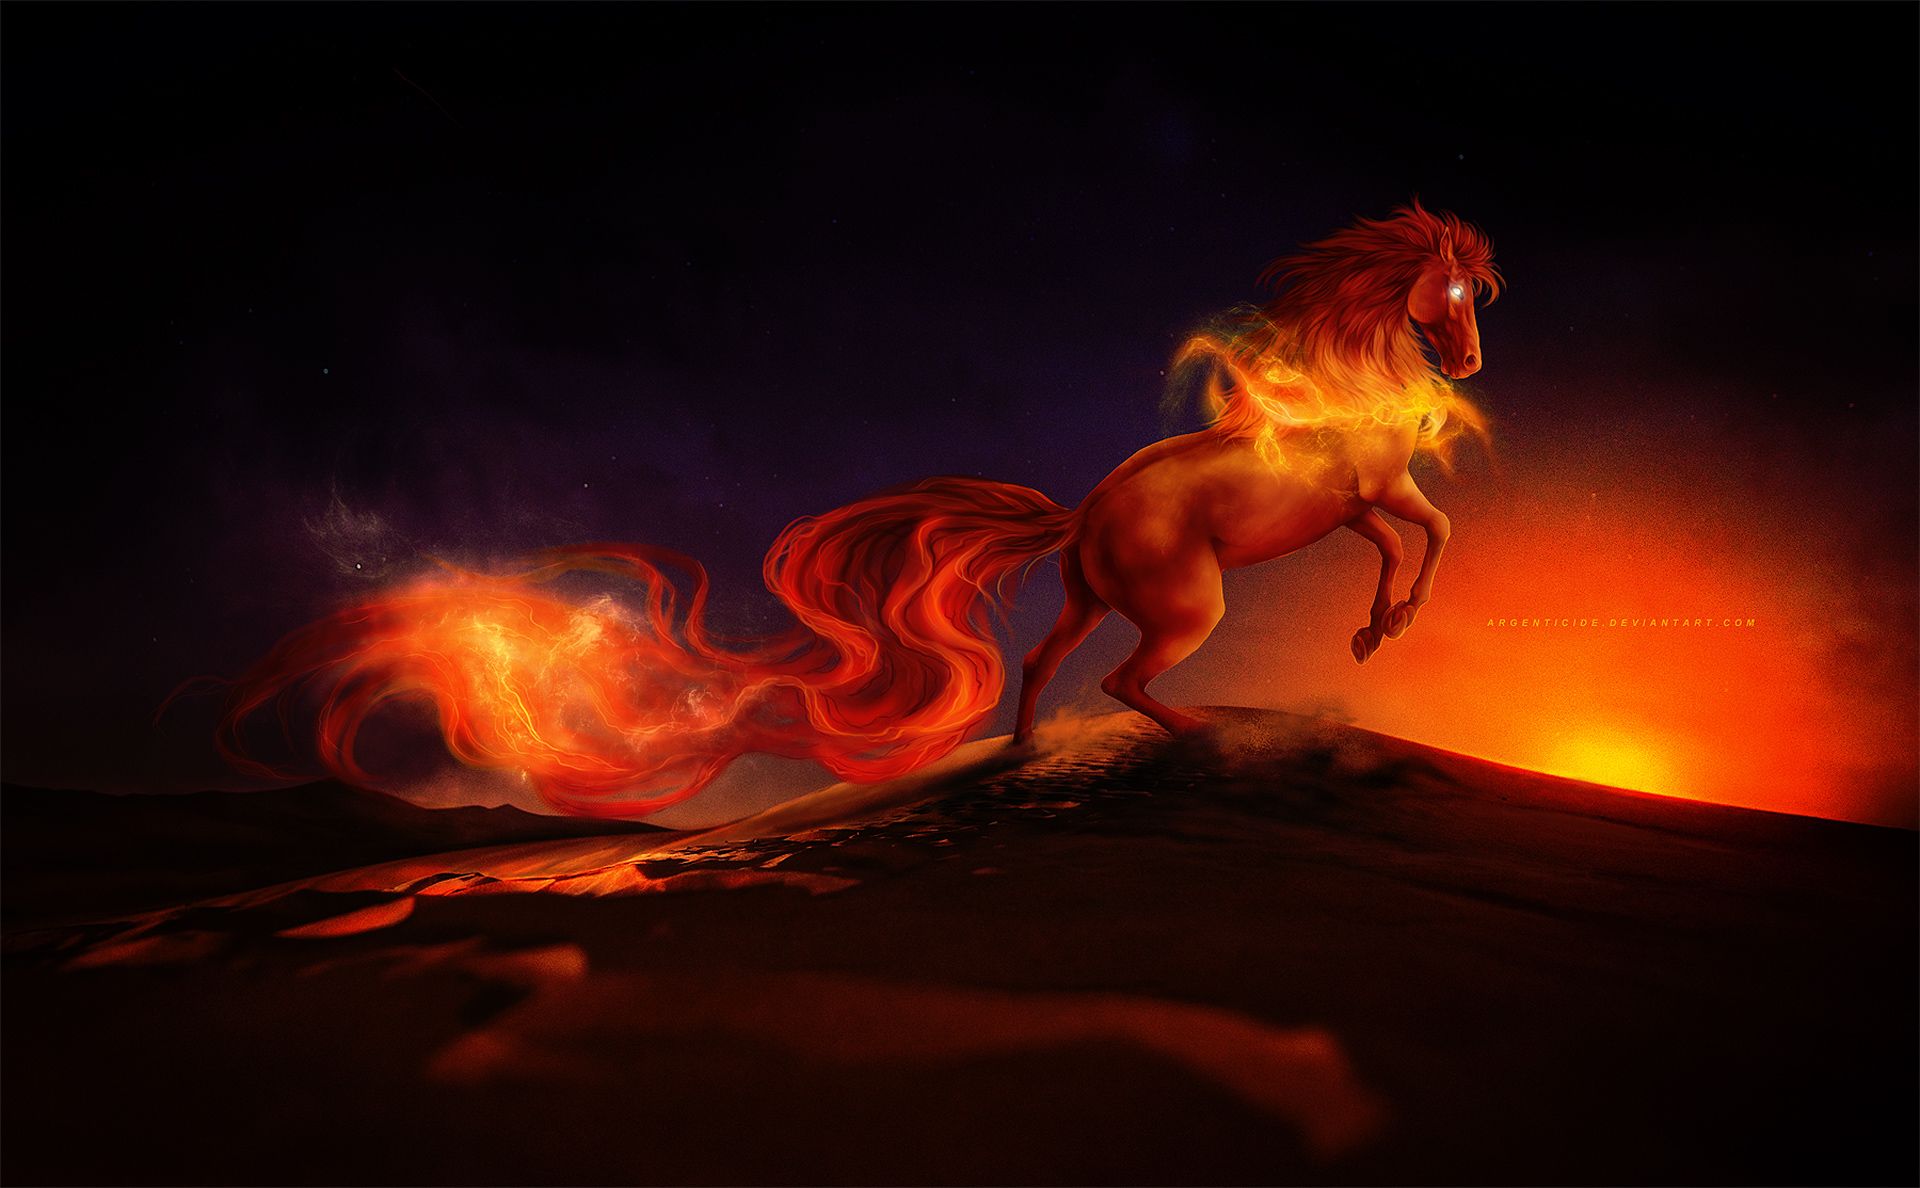 Horse Burning Digital Art, HD Artist, 4k Wallpaper, Image, Background, Photo and Picture